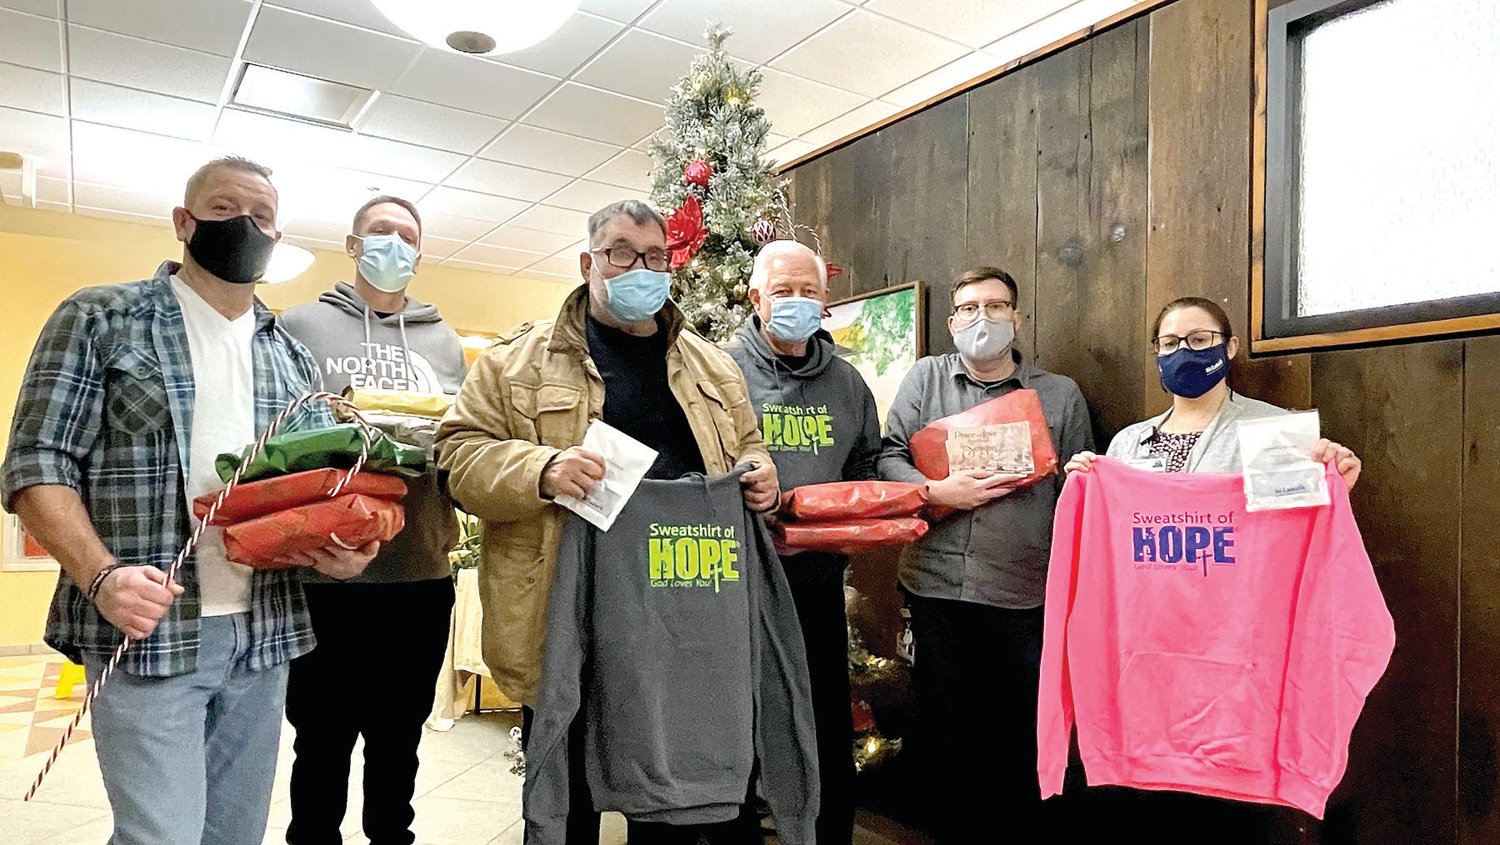 Sweatshirt of Hope in Telford donated sweatshirts for St. Luke’s Penn Foundation inpatient rehab patients to open Christmas morning.